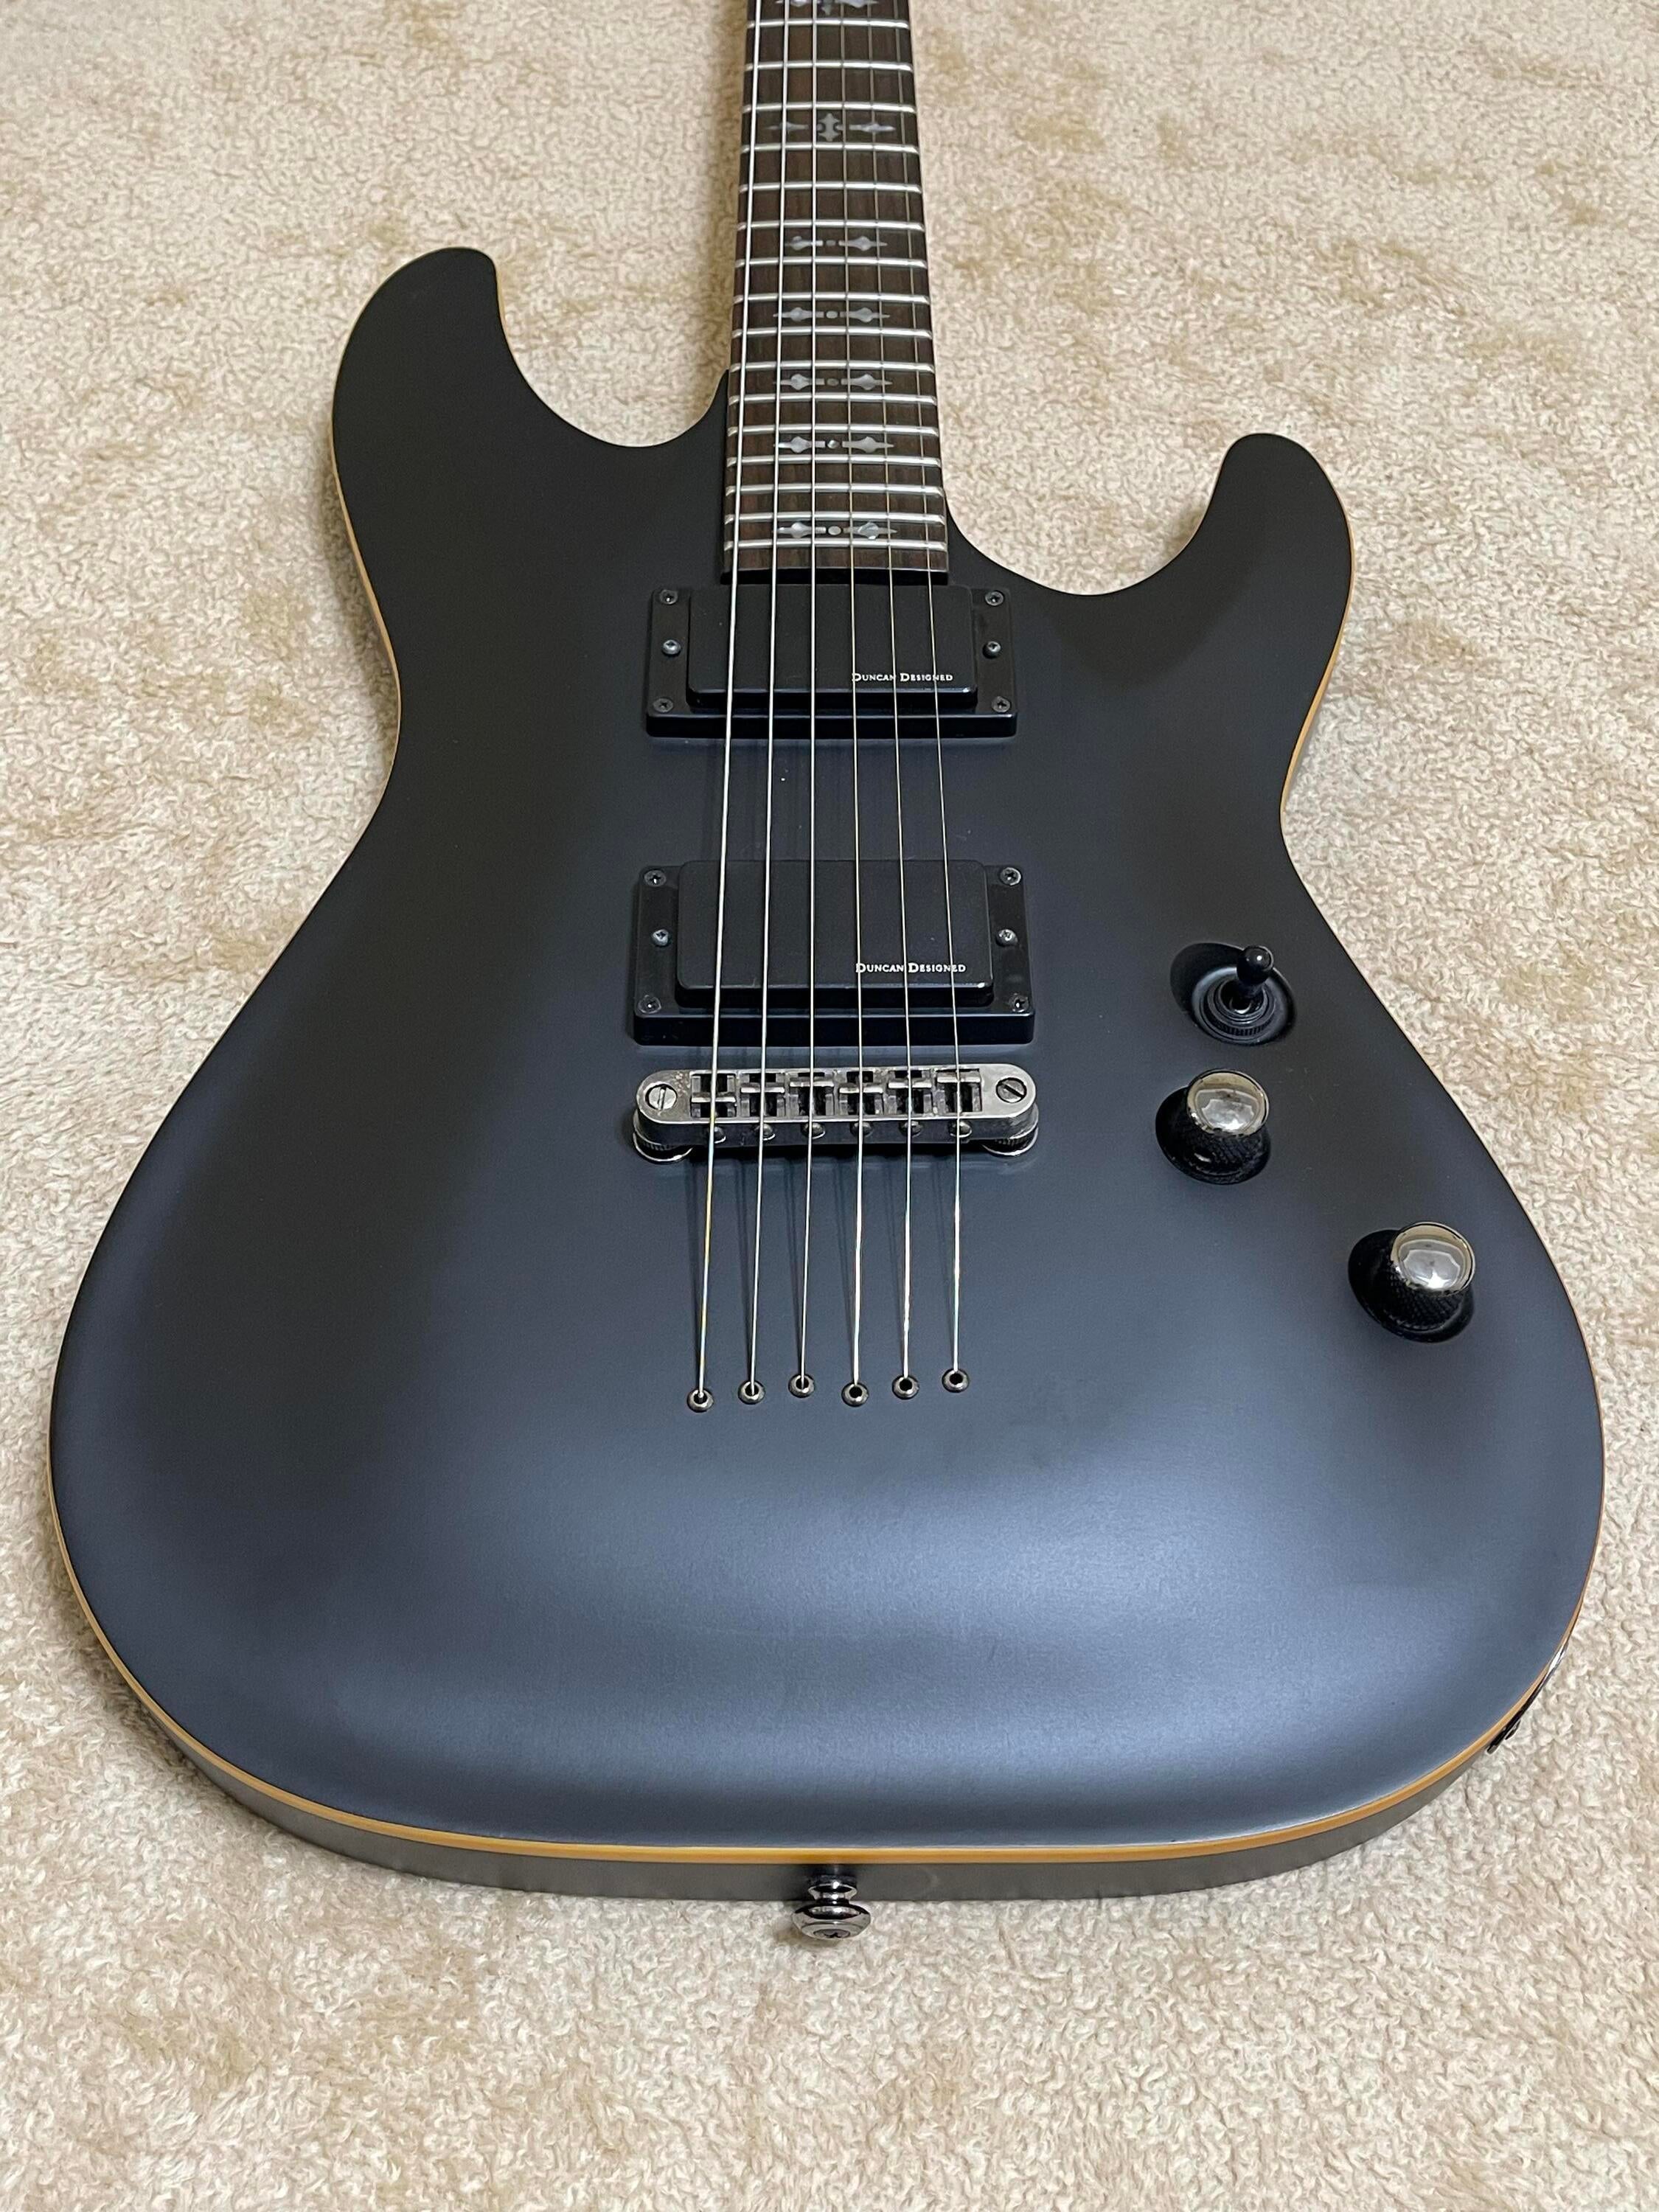 Used Schecter Demon-6 Electric Guitar Aged - Sweetwater's Gear